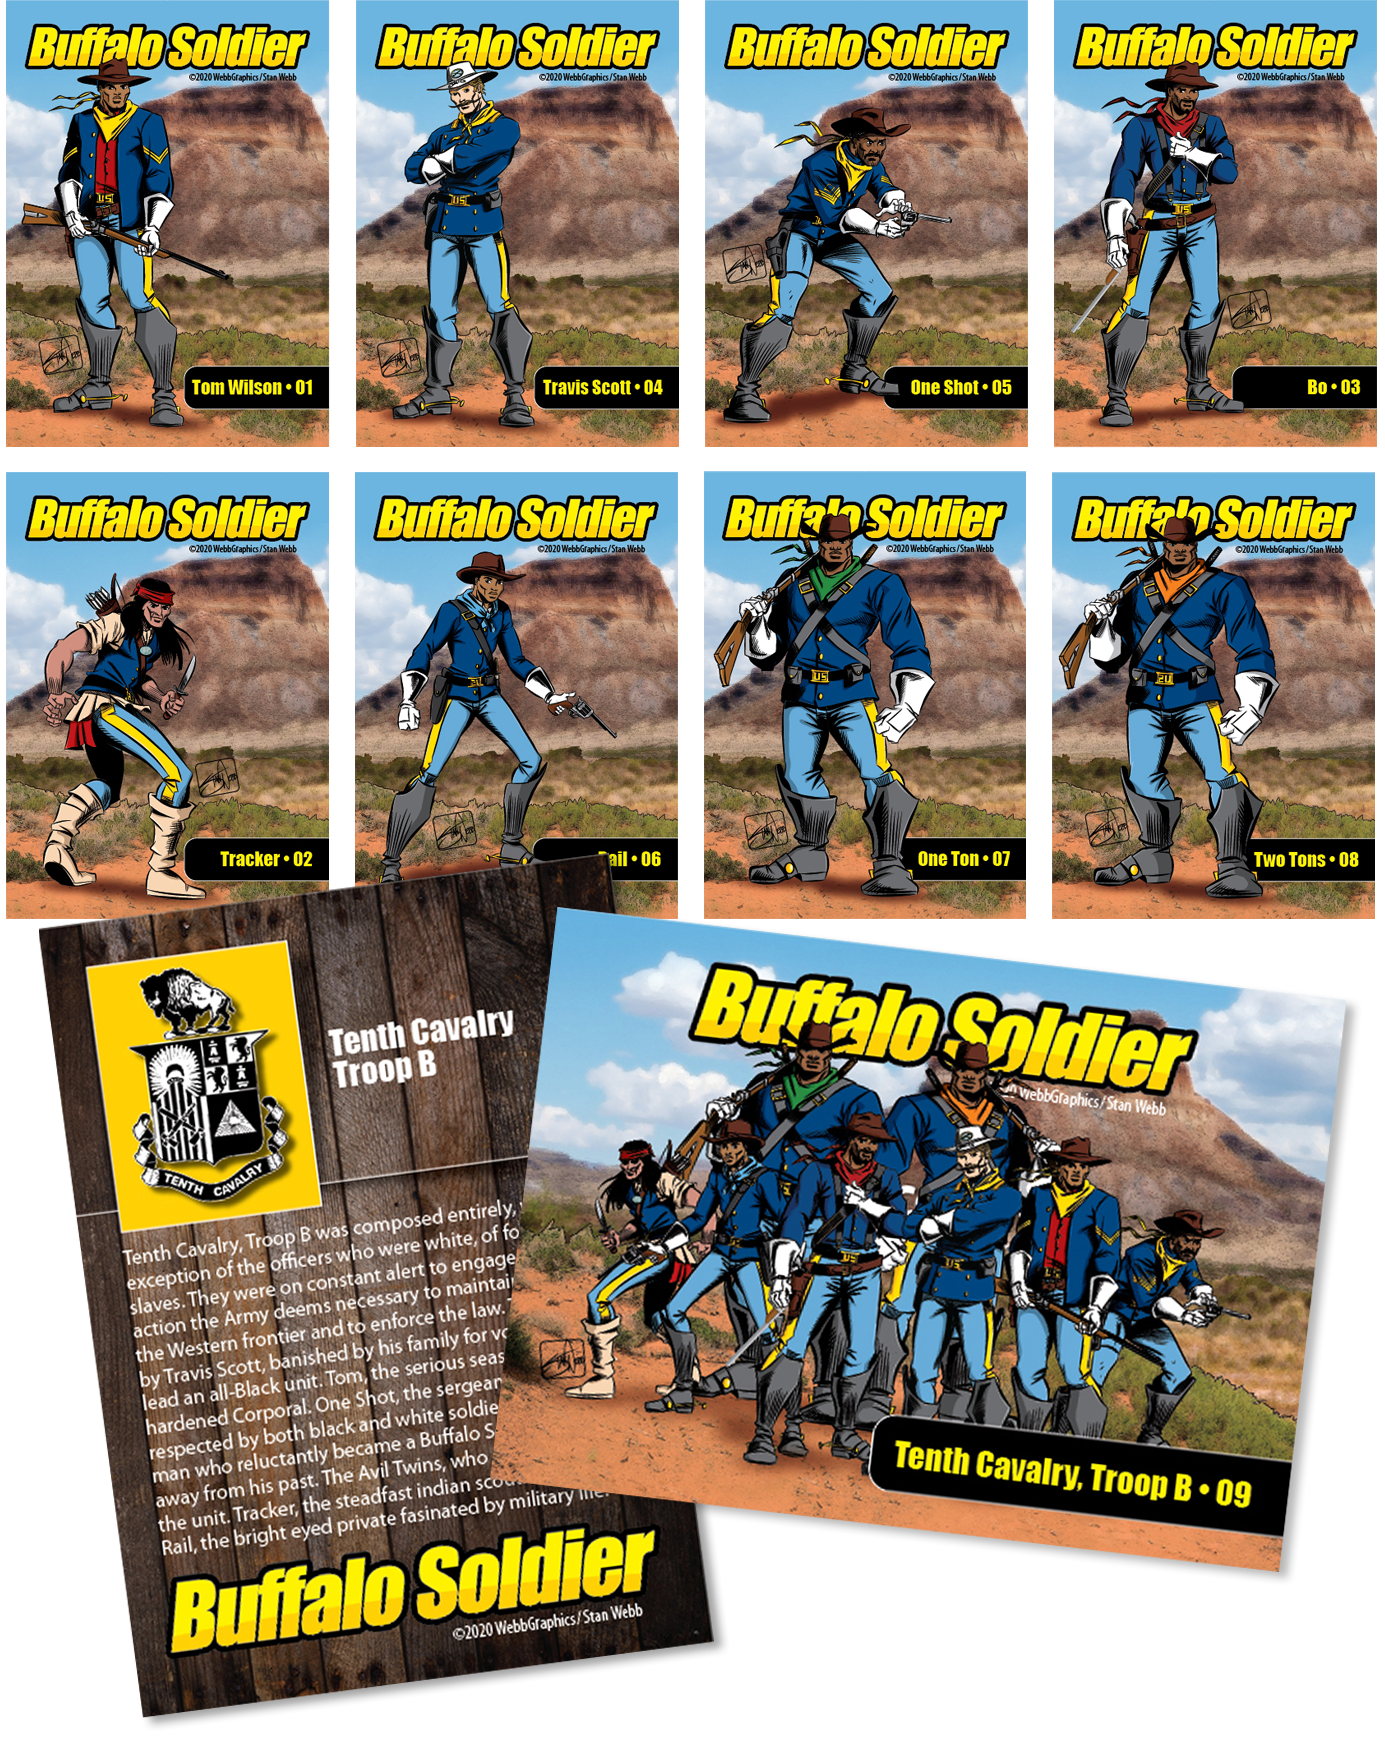 Buffalo Soldier Tading Cards